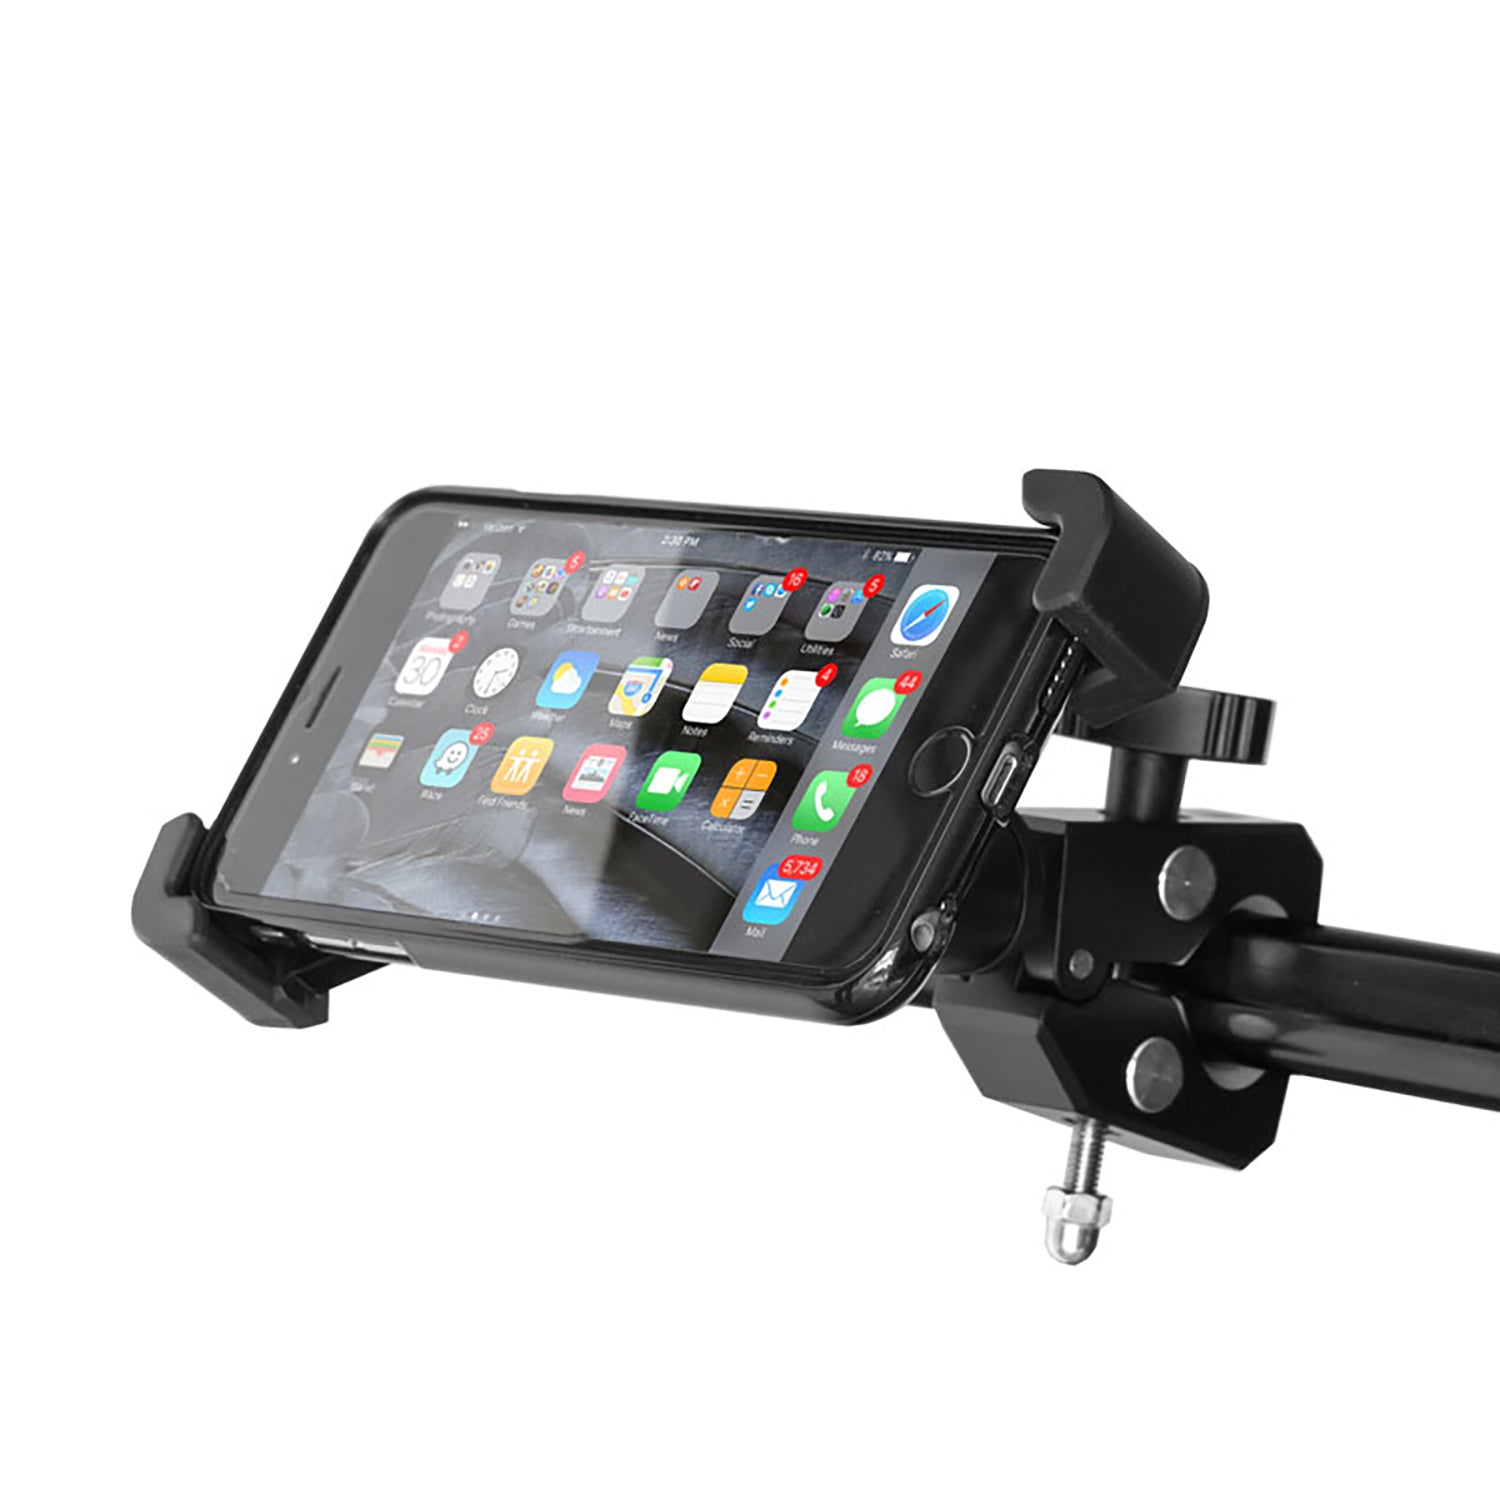 Grifiti Nootle Heavy Duty Bar Clamp Full Metal Construction + Universal Phone and iPhone Mount - Grifiti